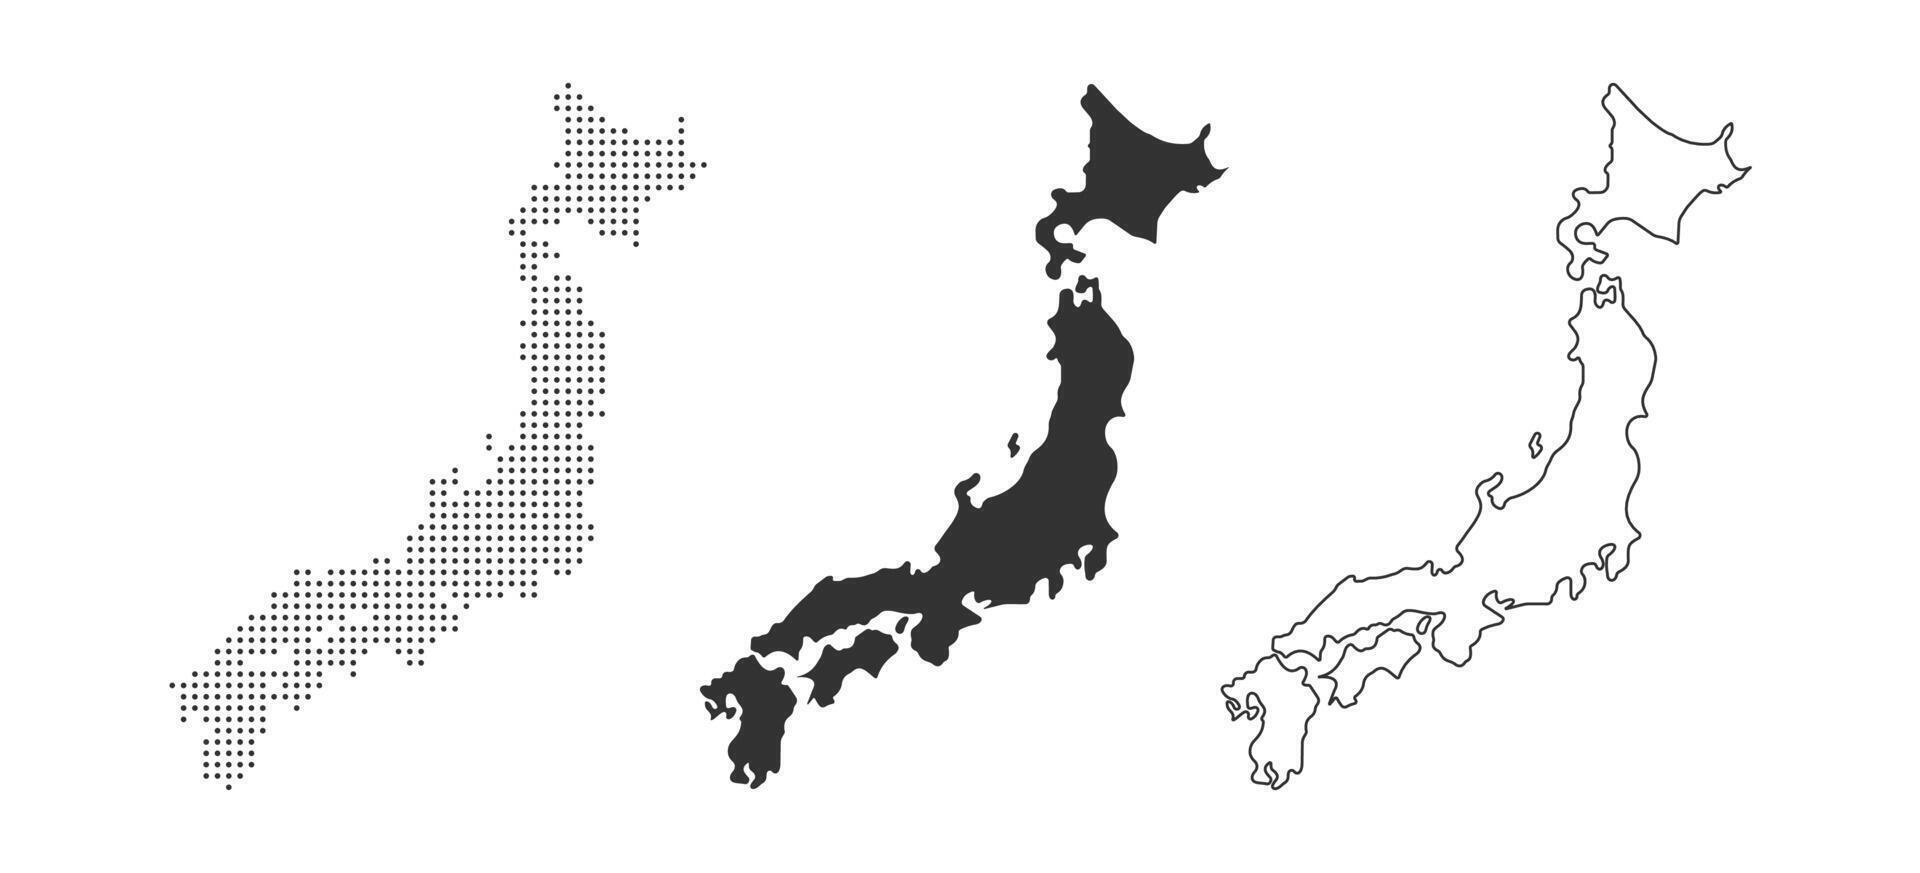 Japan map. Asia region cartography. Japanese geography border. Nation contour. Okinawa state. Vector illustration.